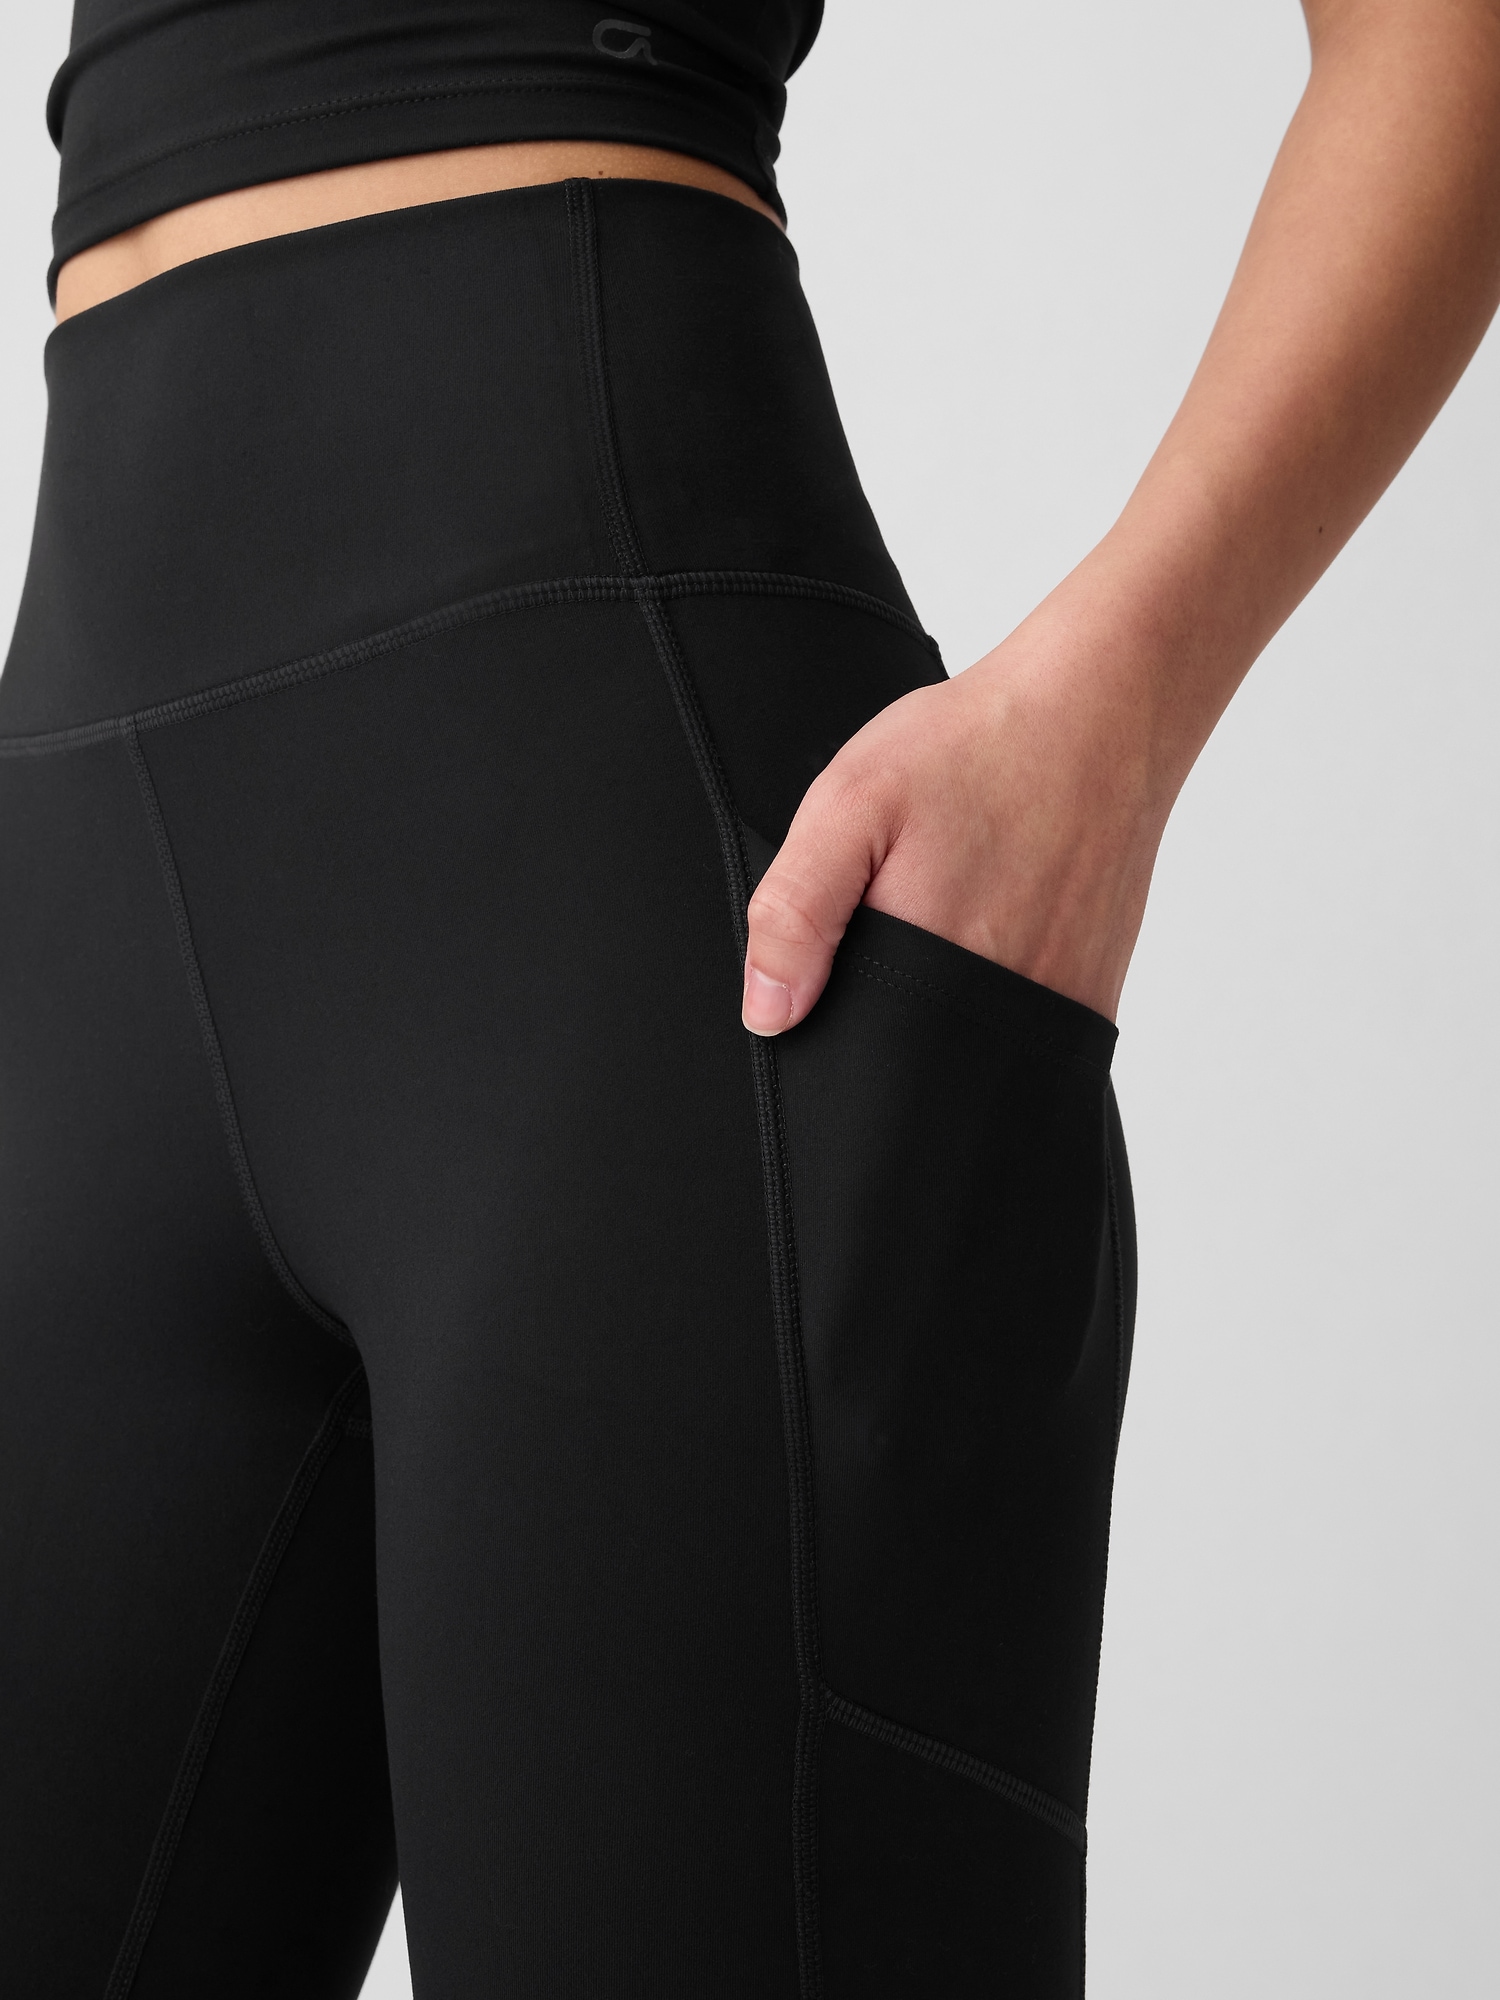 Guess Womens Active Full Length Leggings with Mesh Detail 